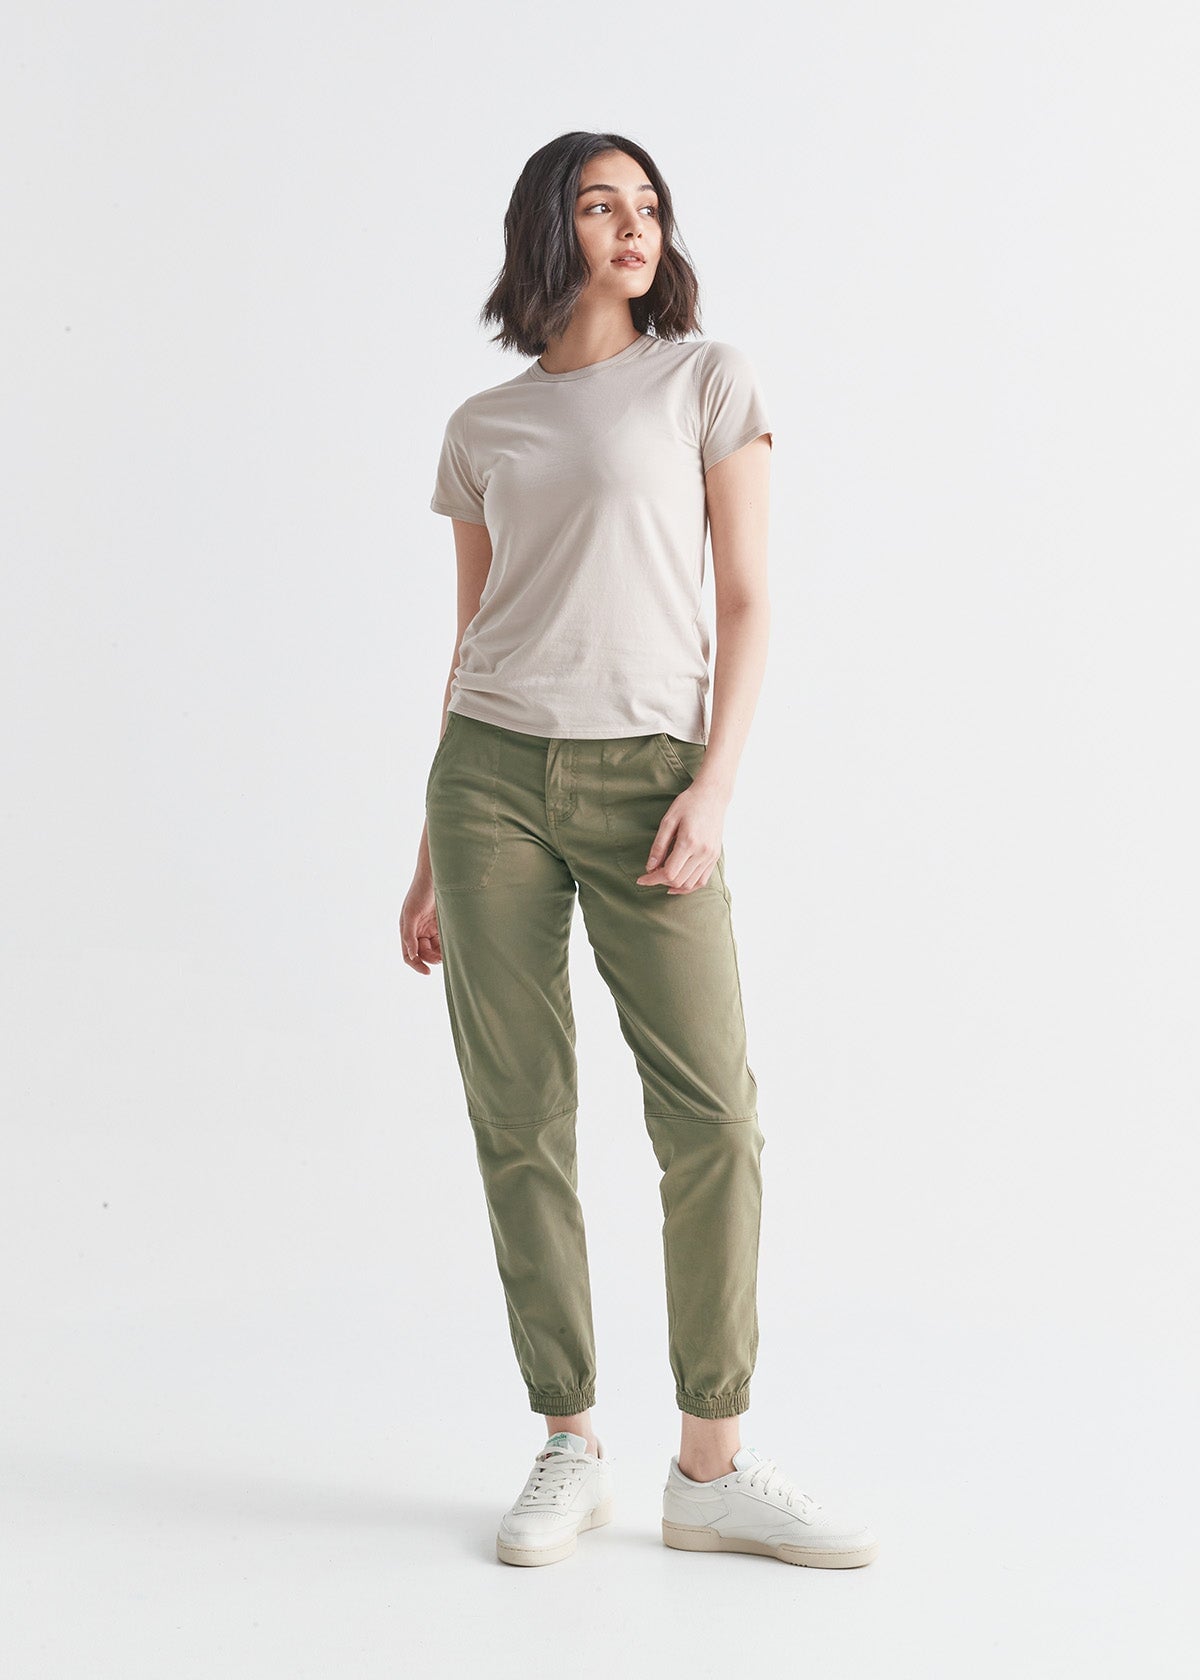 Ribbed Take Comfort Wide Leg Pants in Athletic Heather Grey by Alo Yoga